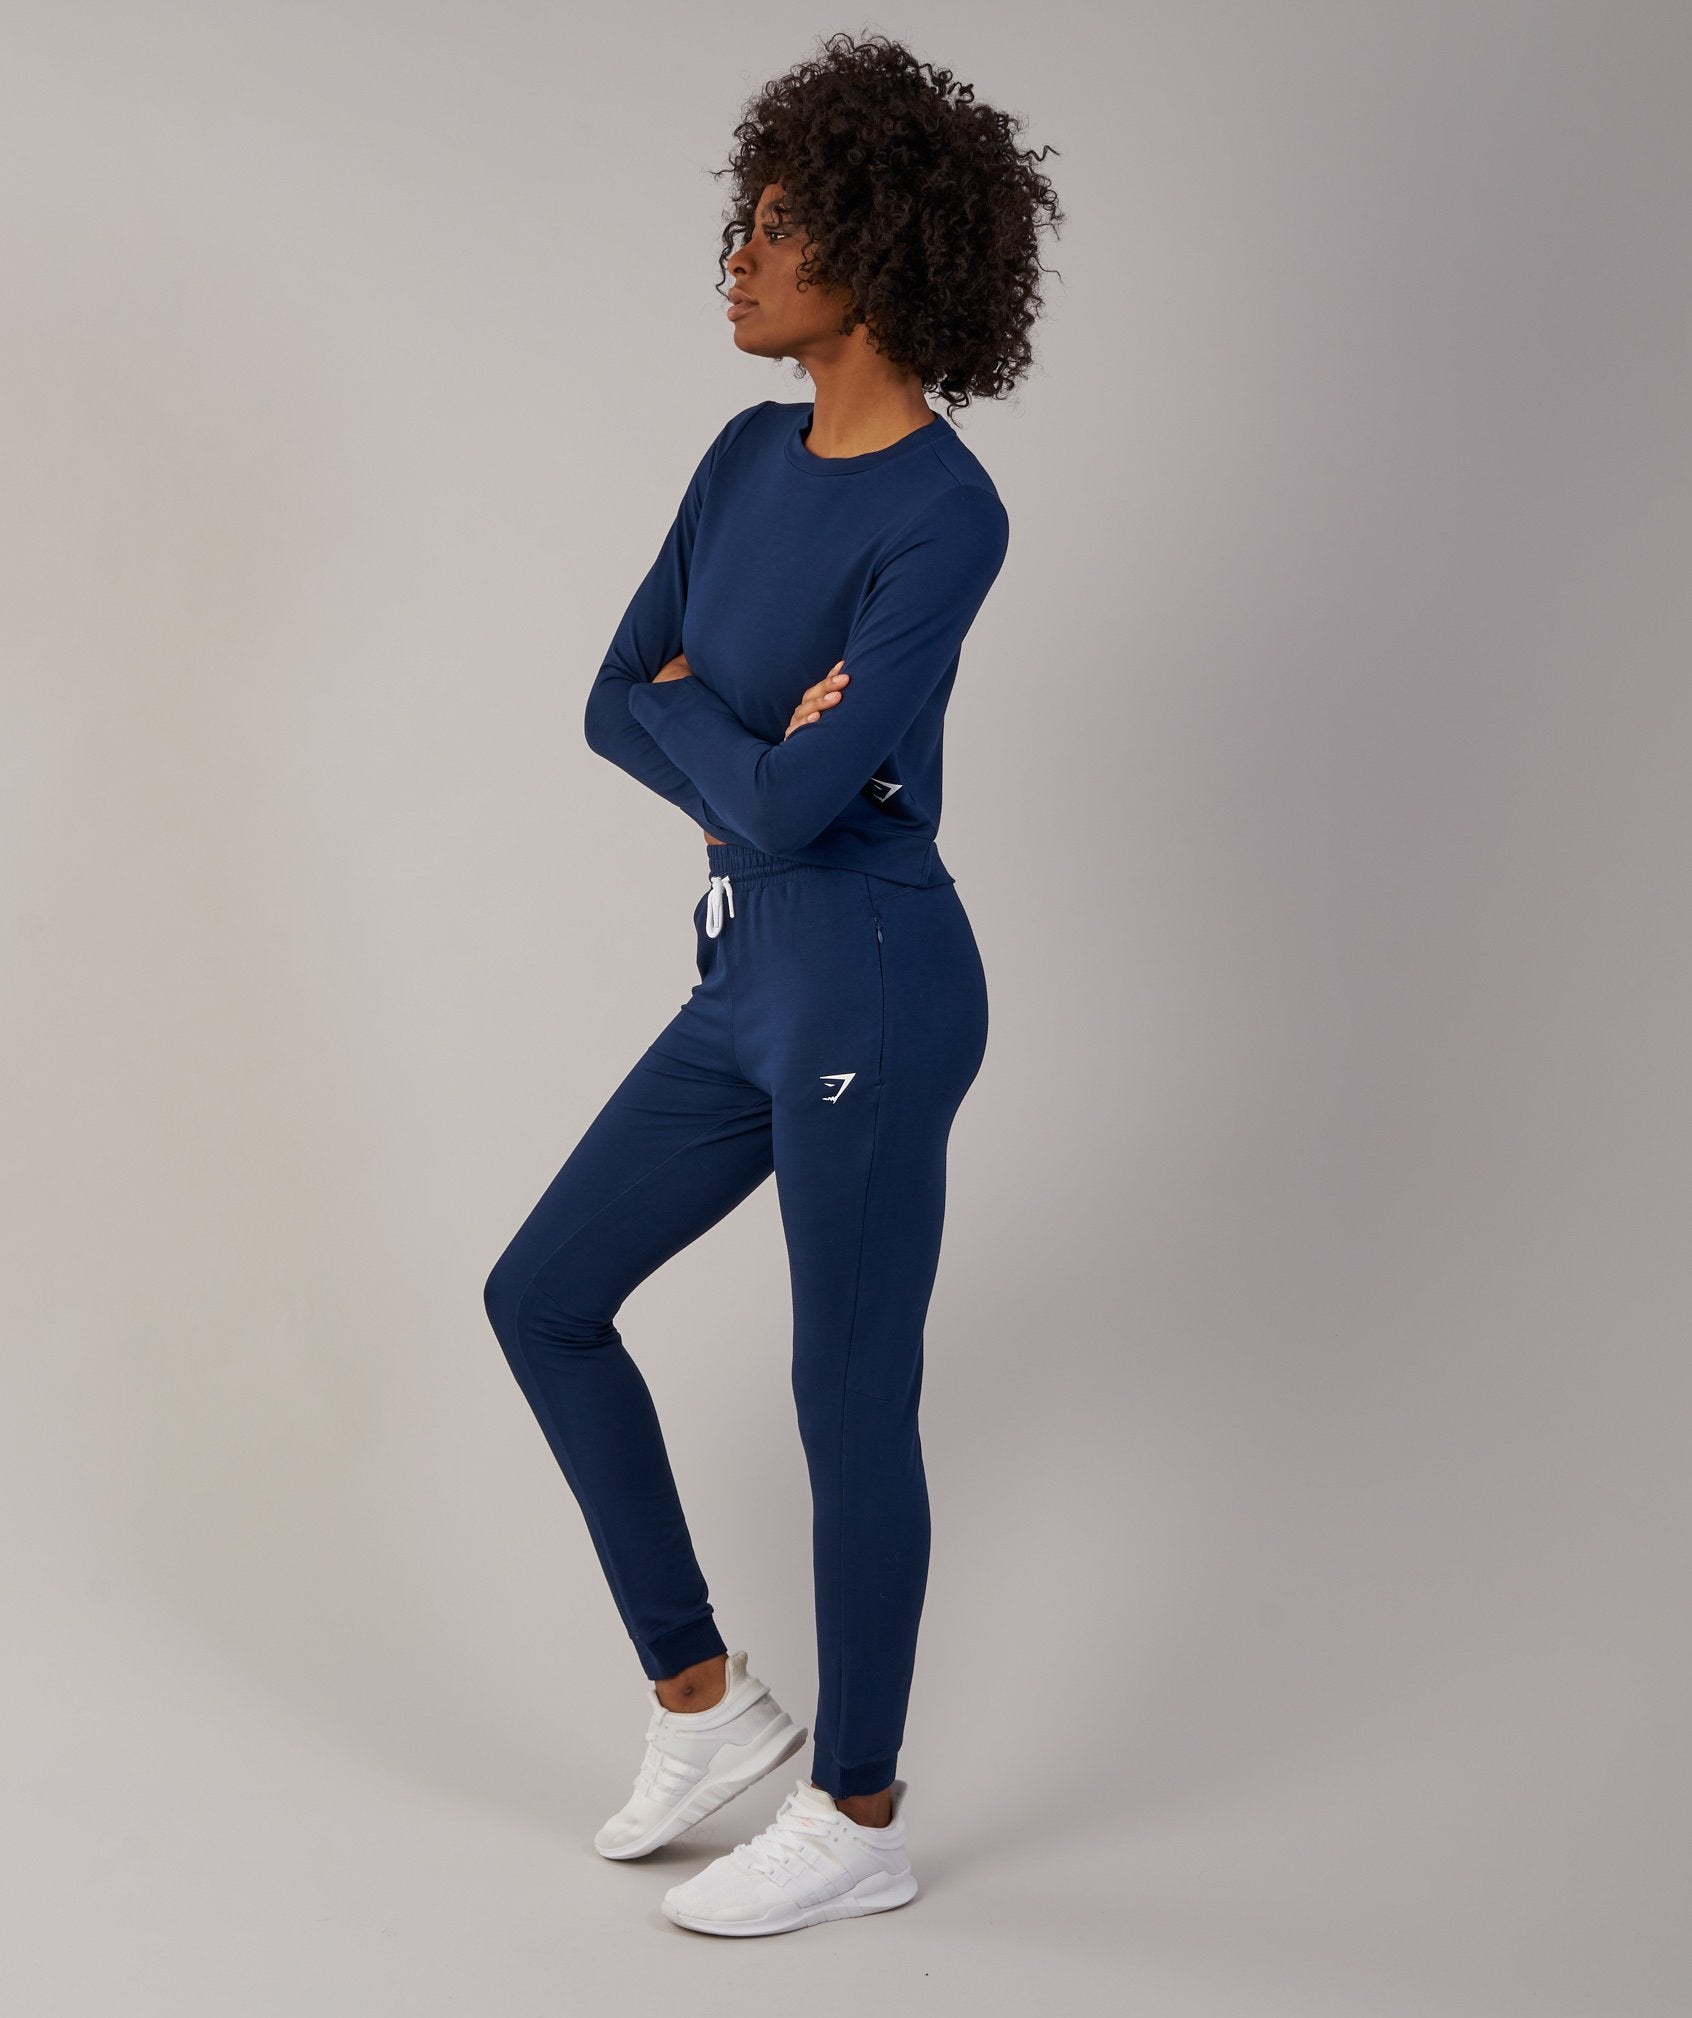 Solace Bottoms in Sapphire Blue Marl - view 4